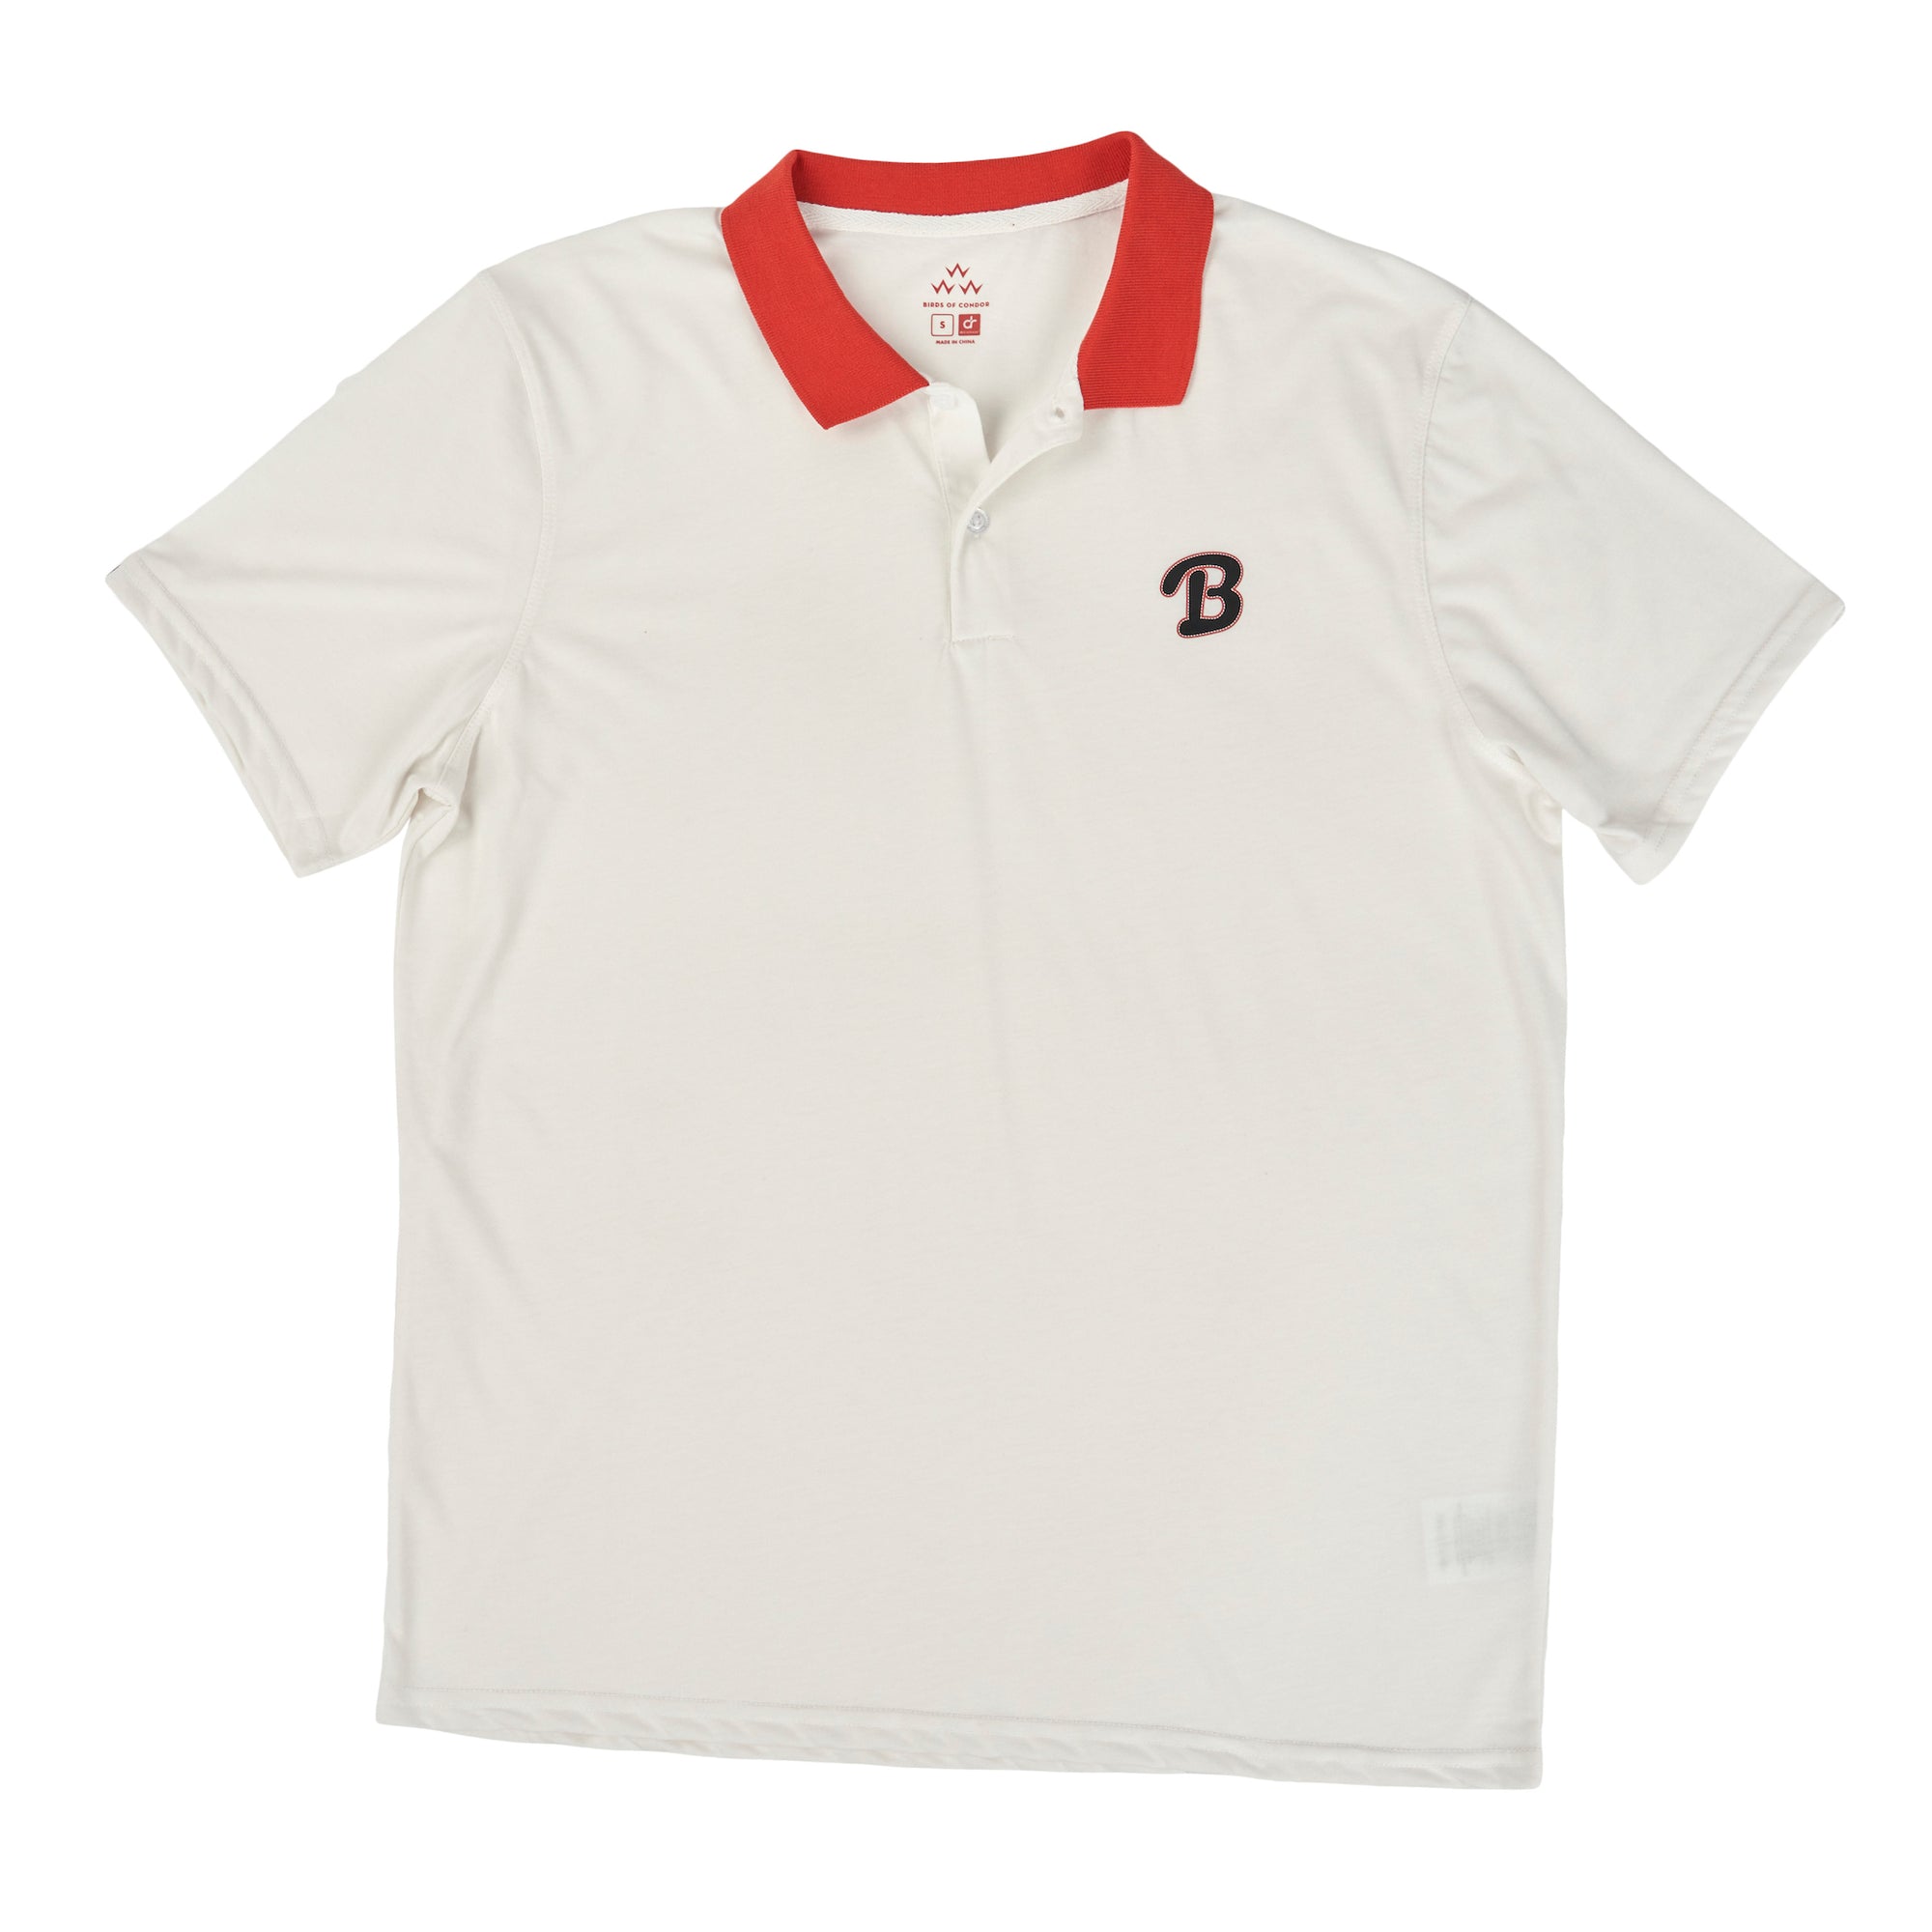 Golf polos don't get any better than this.  Cool white and red baller polo for all the ballers and B's.  Birds of Condor golf apparel